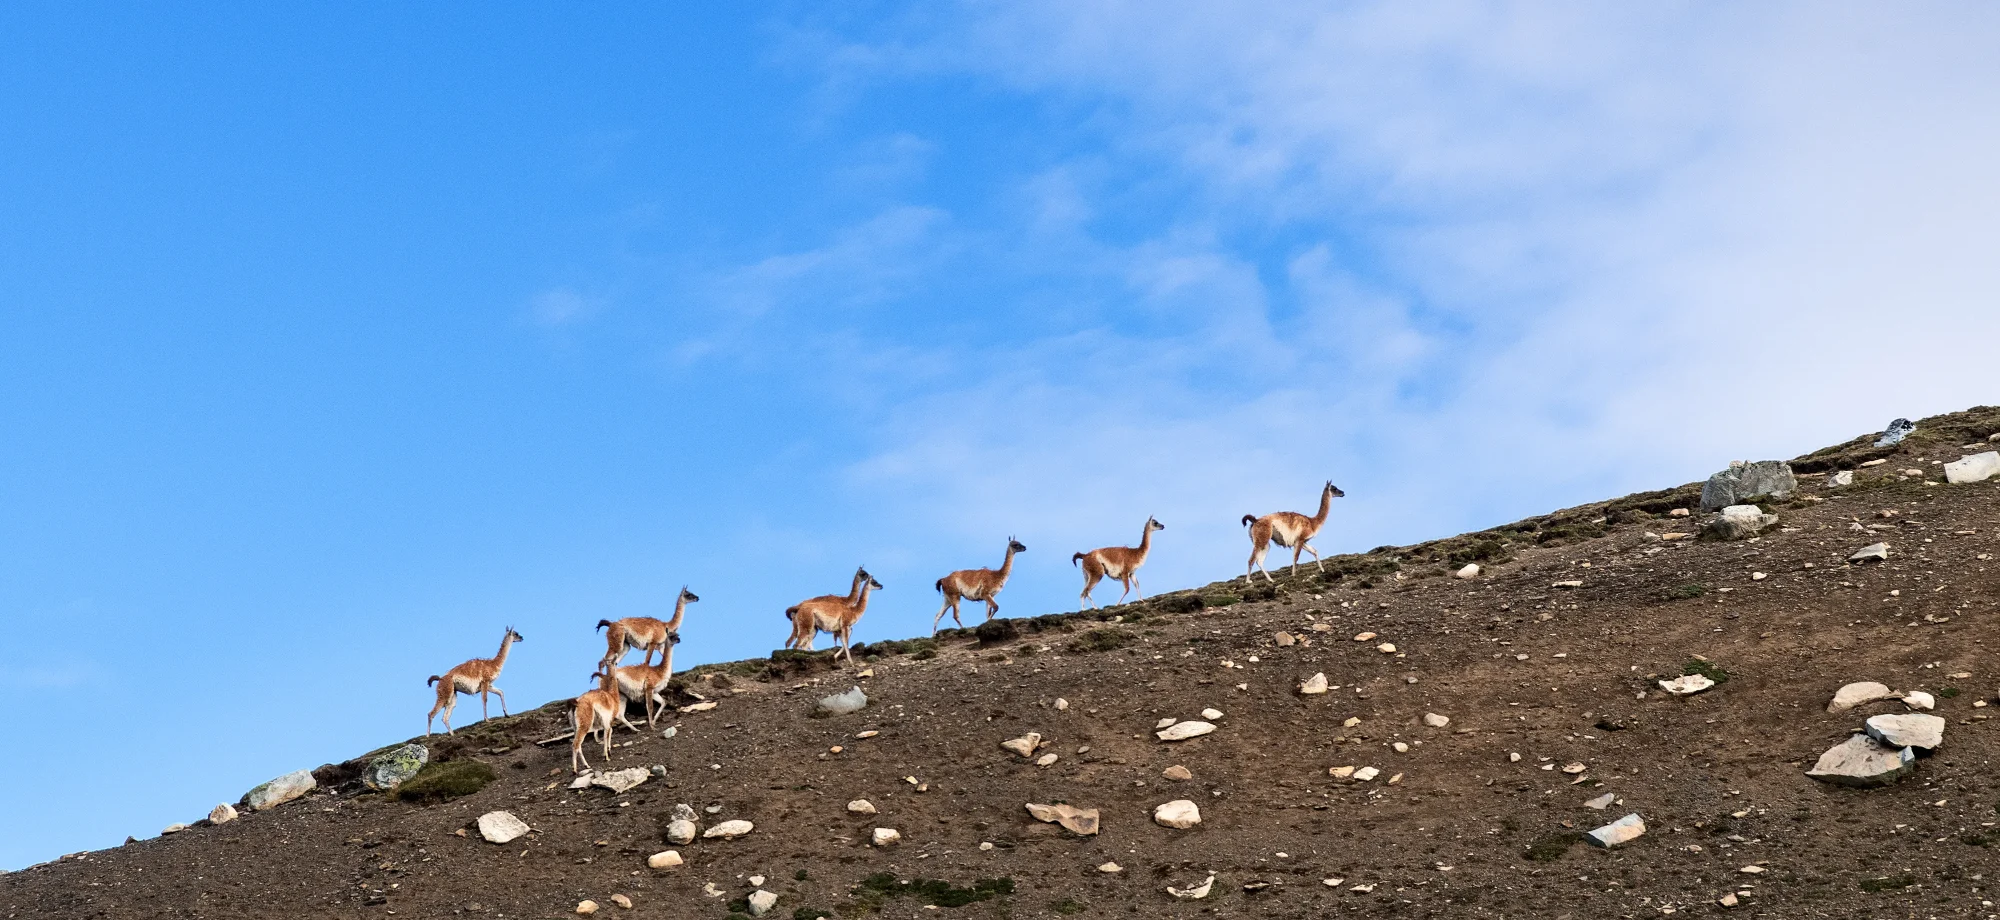 A line of guanacos wander up a steep hill ahead of a bright blue sky.